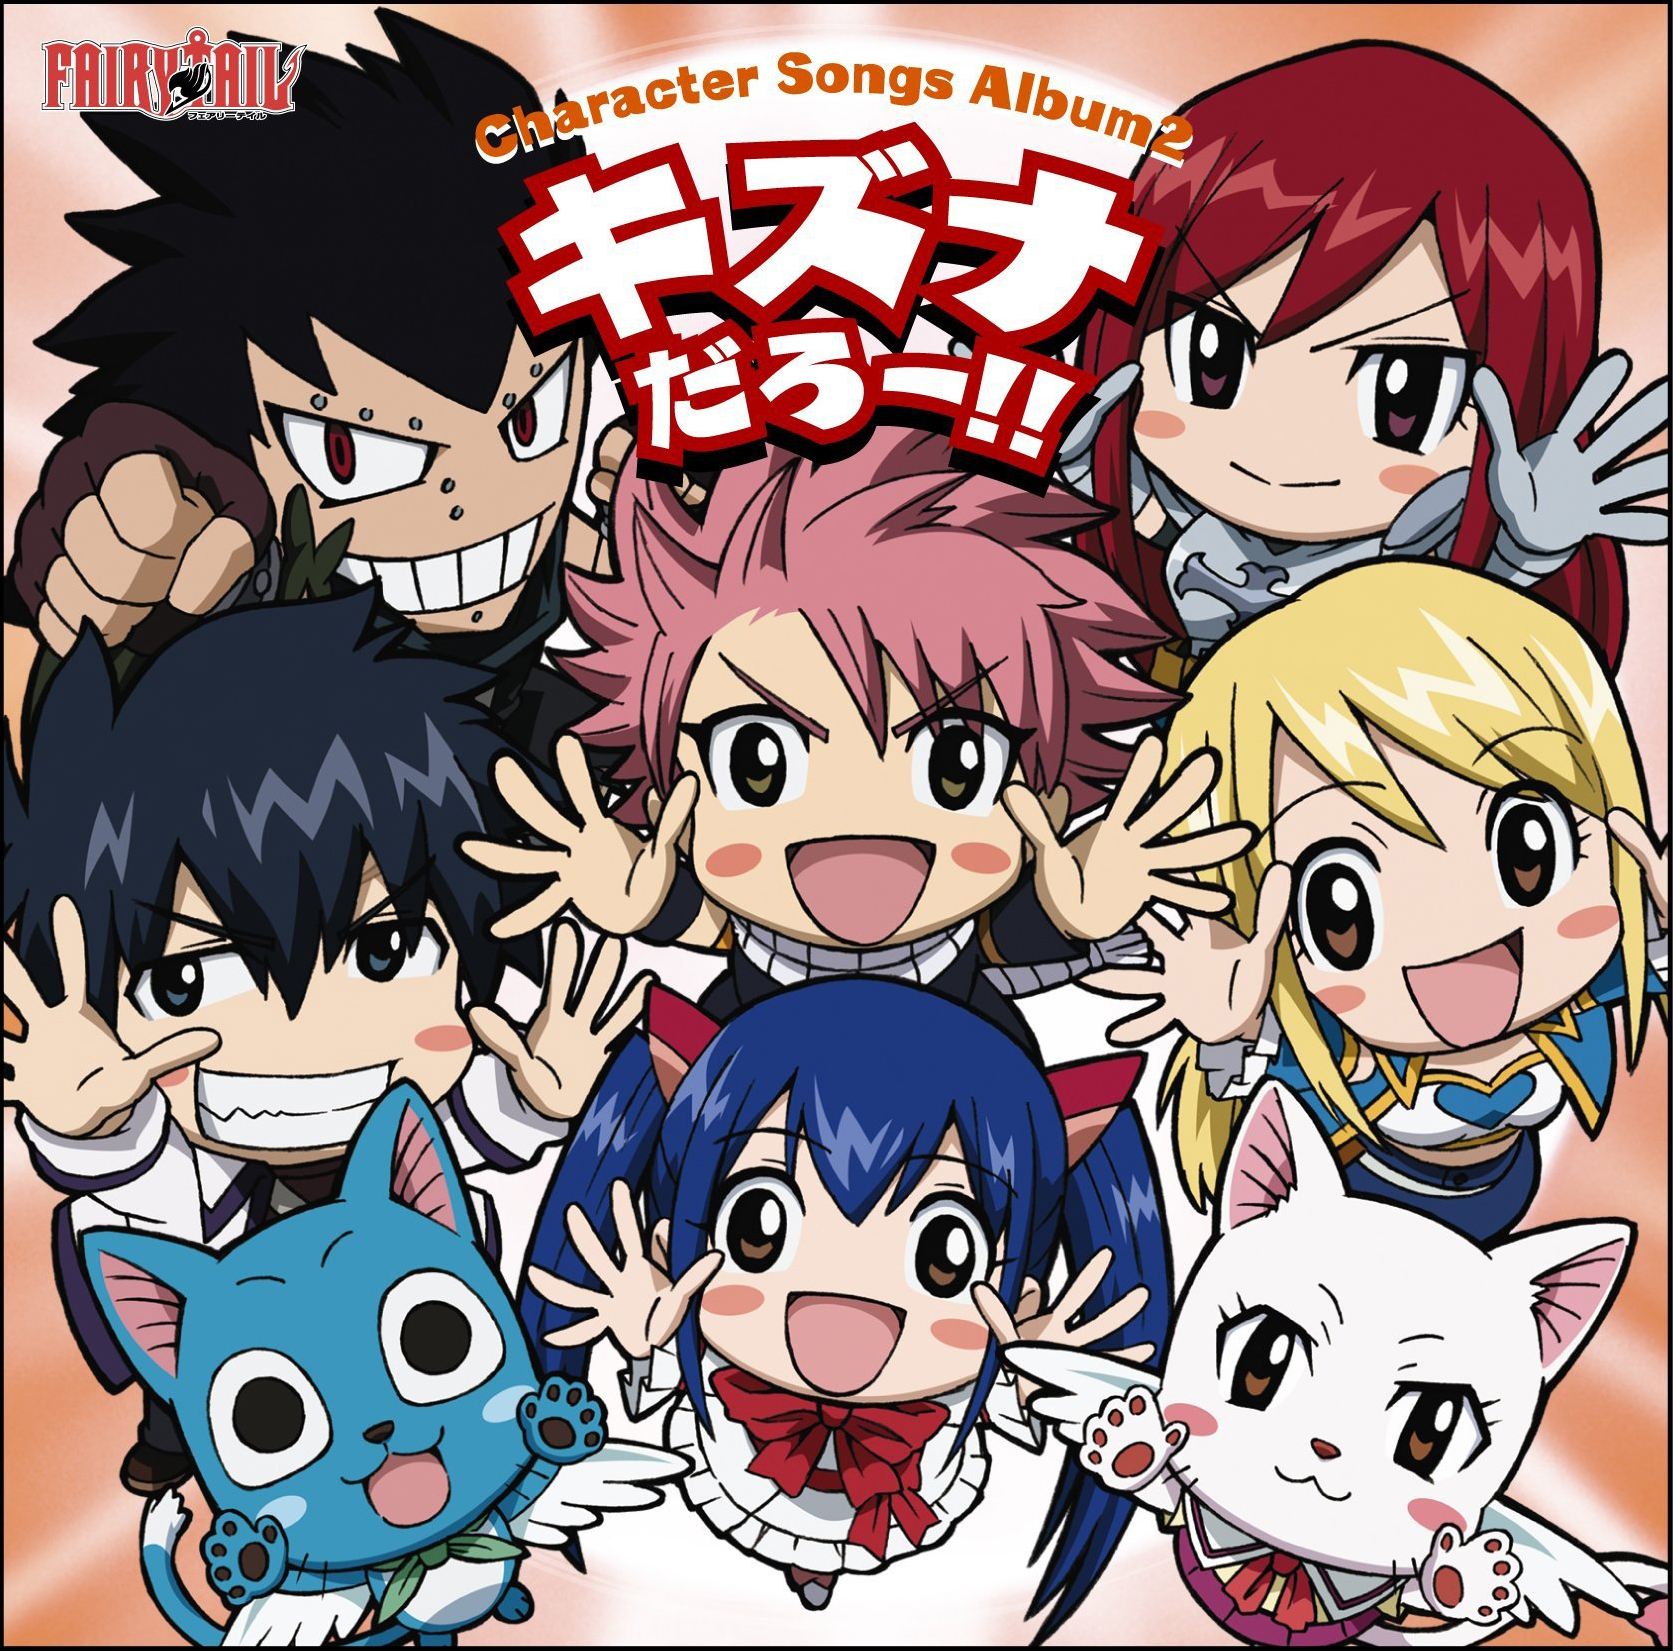 Fairy Tail 2019 Wallpapers